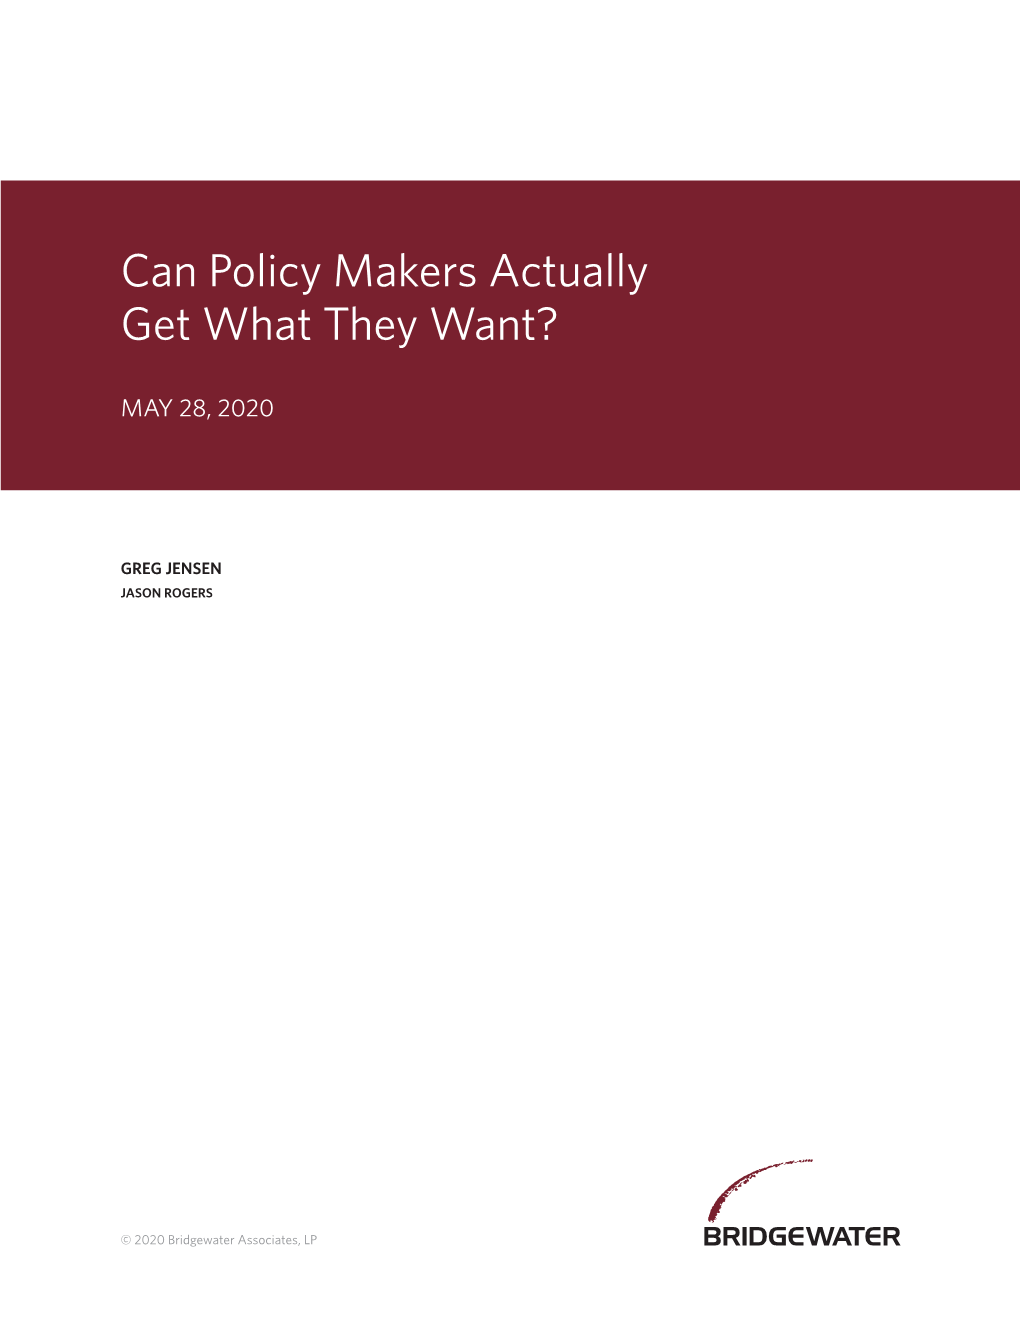 Can Policy Makers Actually Get What They Want?